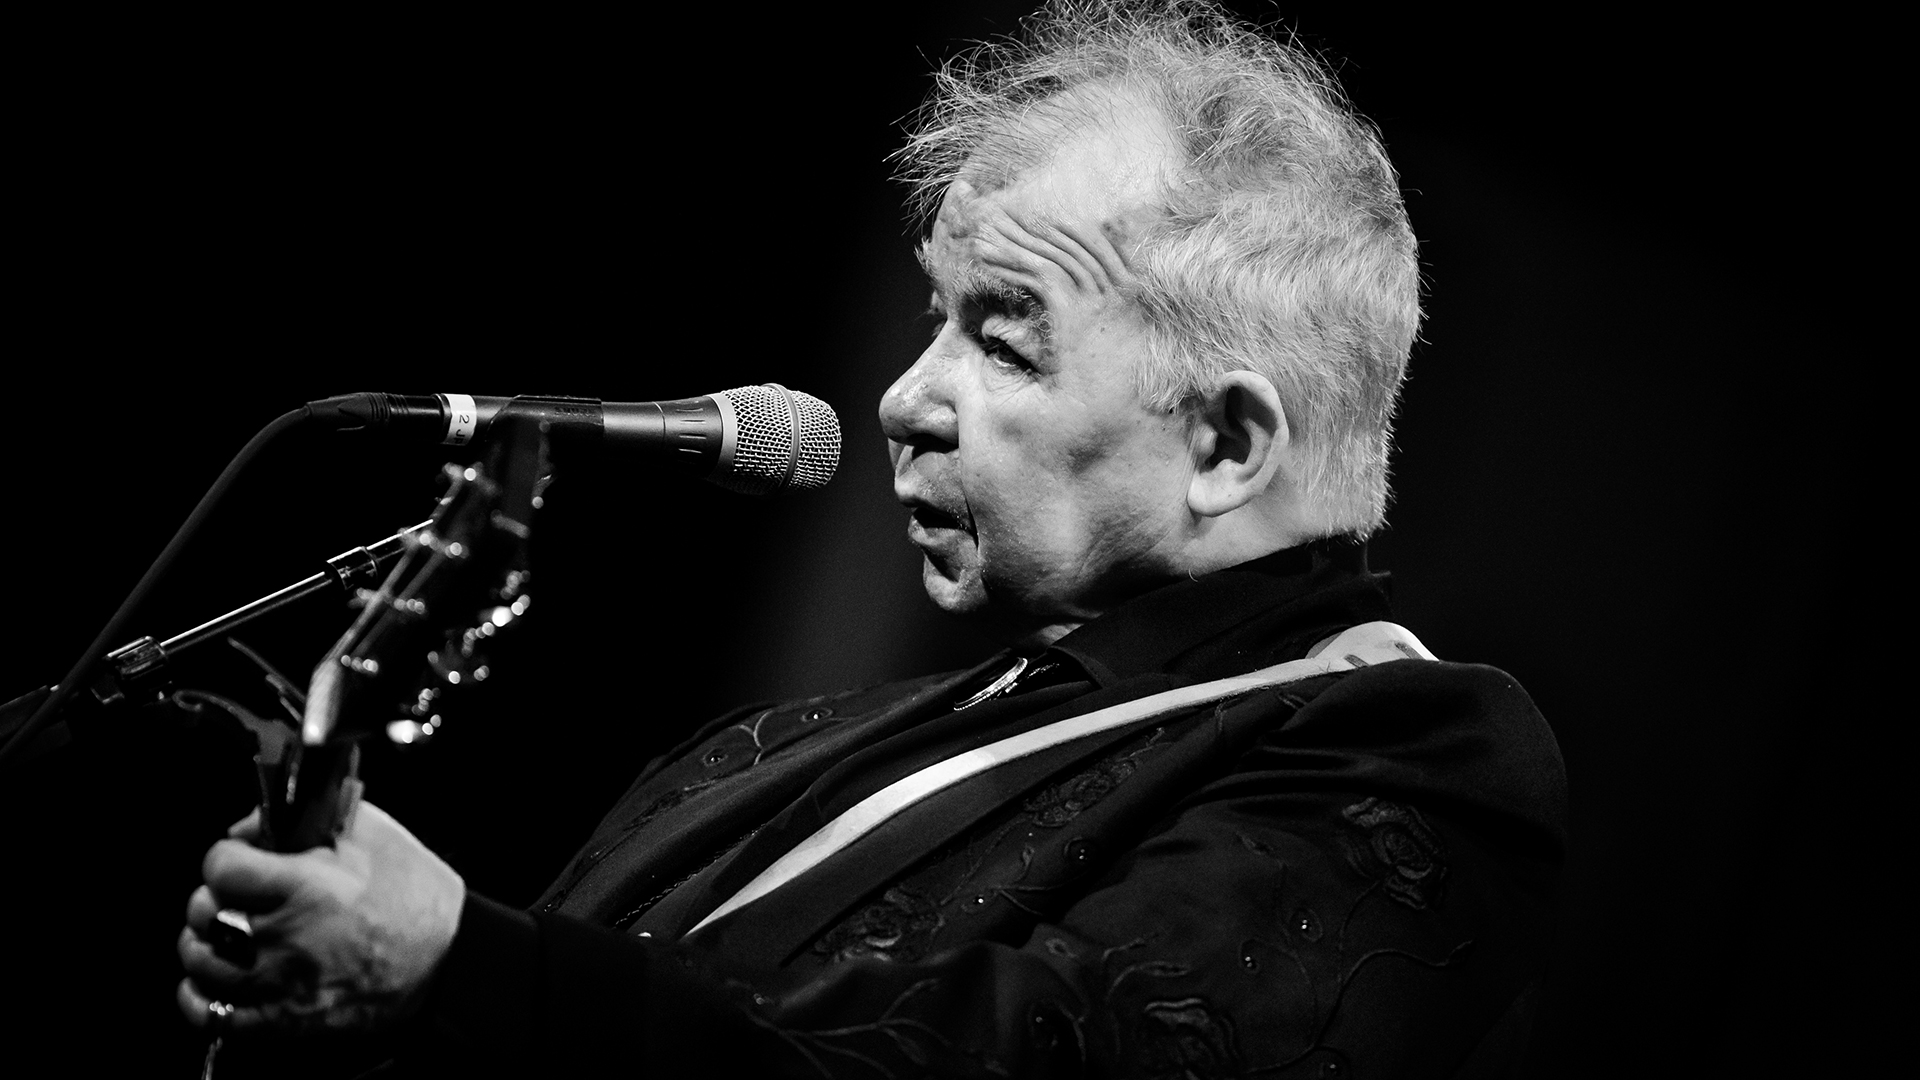 John Prine performing in 2019 (Photograph by Rich Fury/Getty Images)